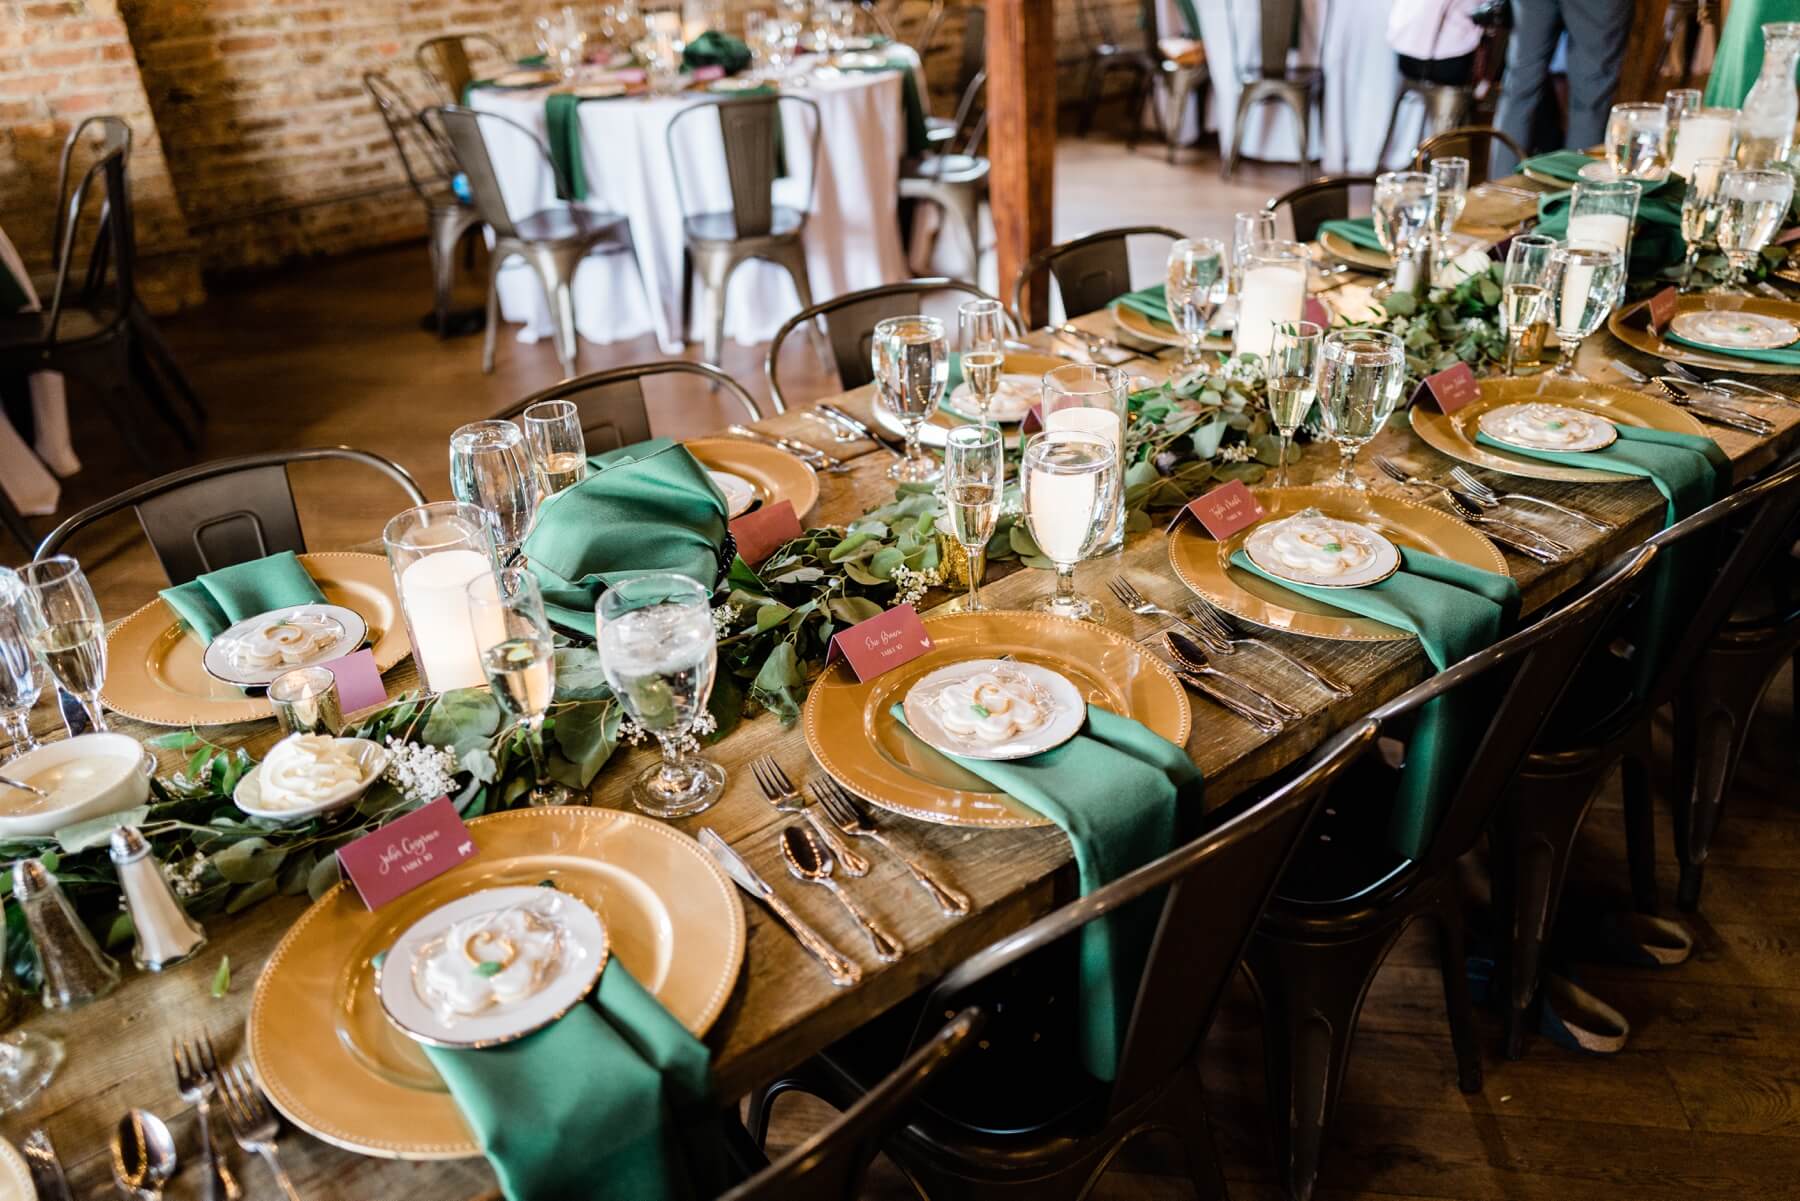 Wedding reception table with gold chargers, green napkins, and greenery